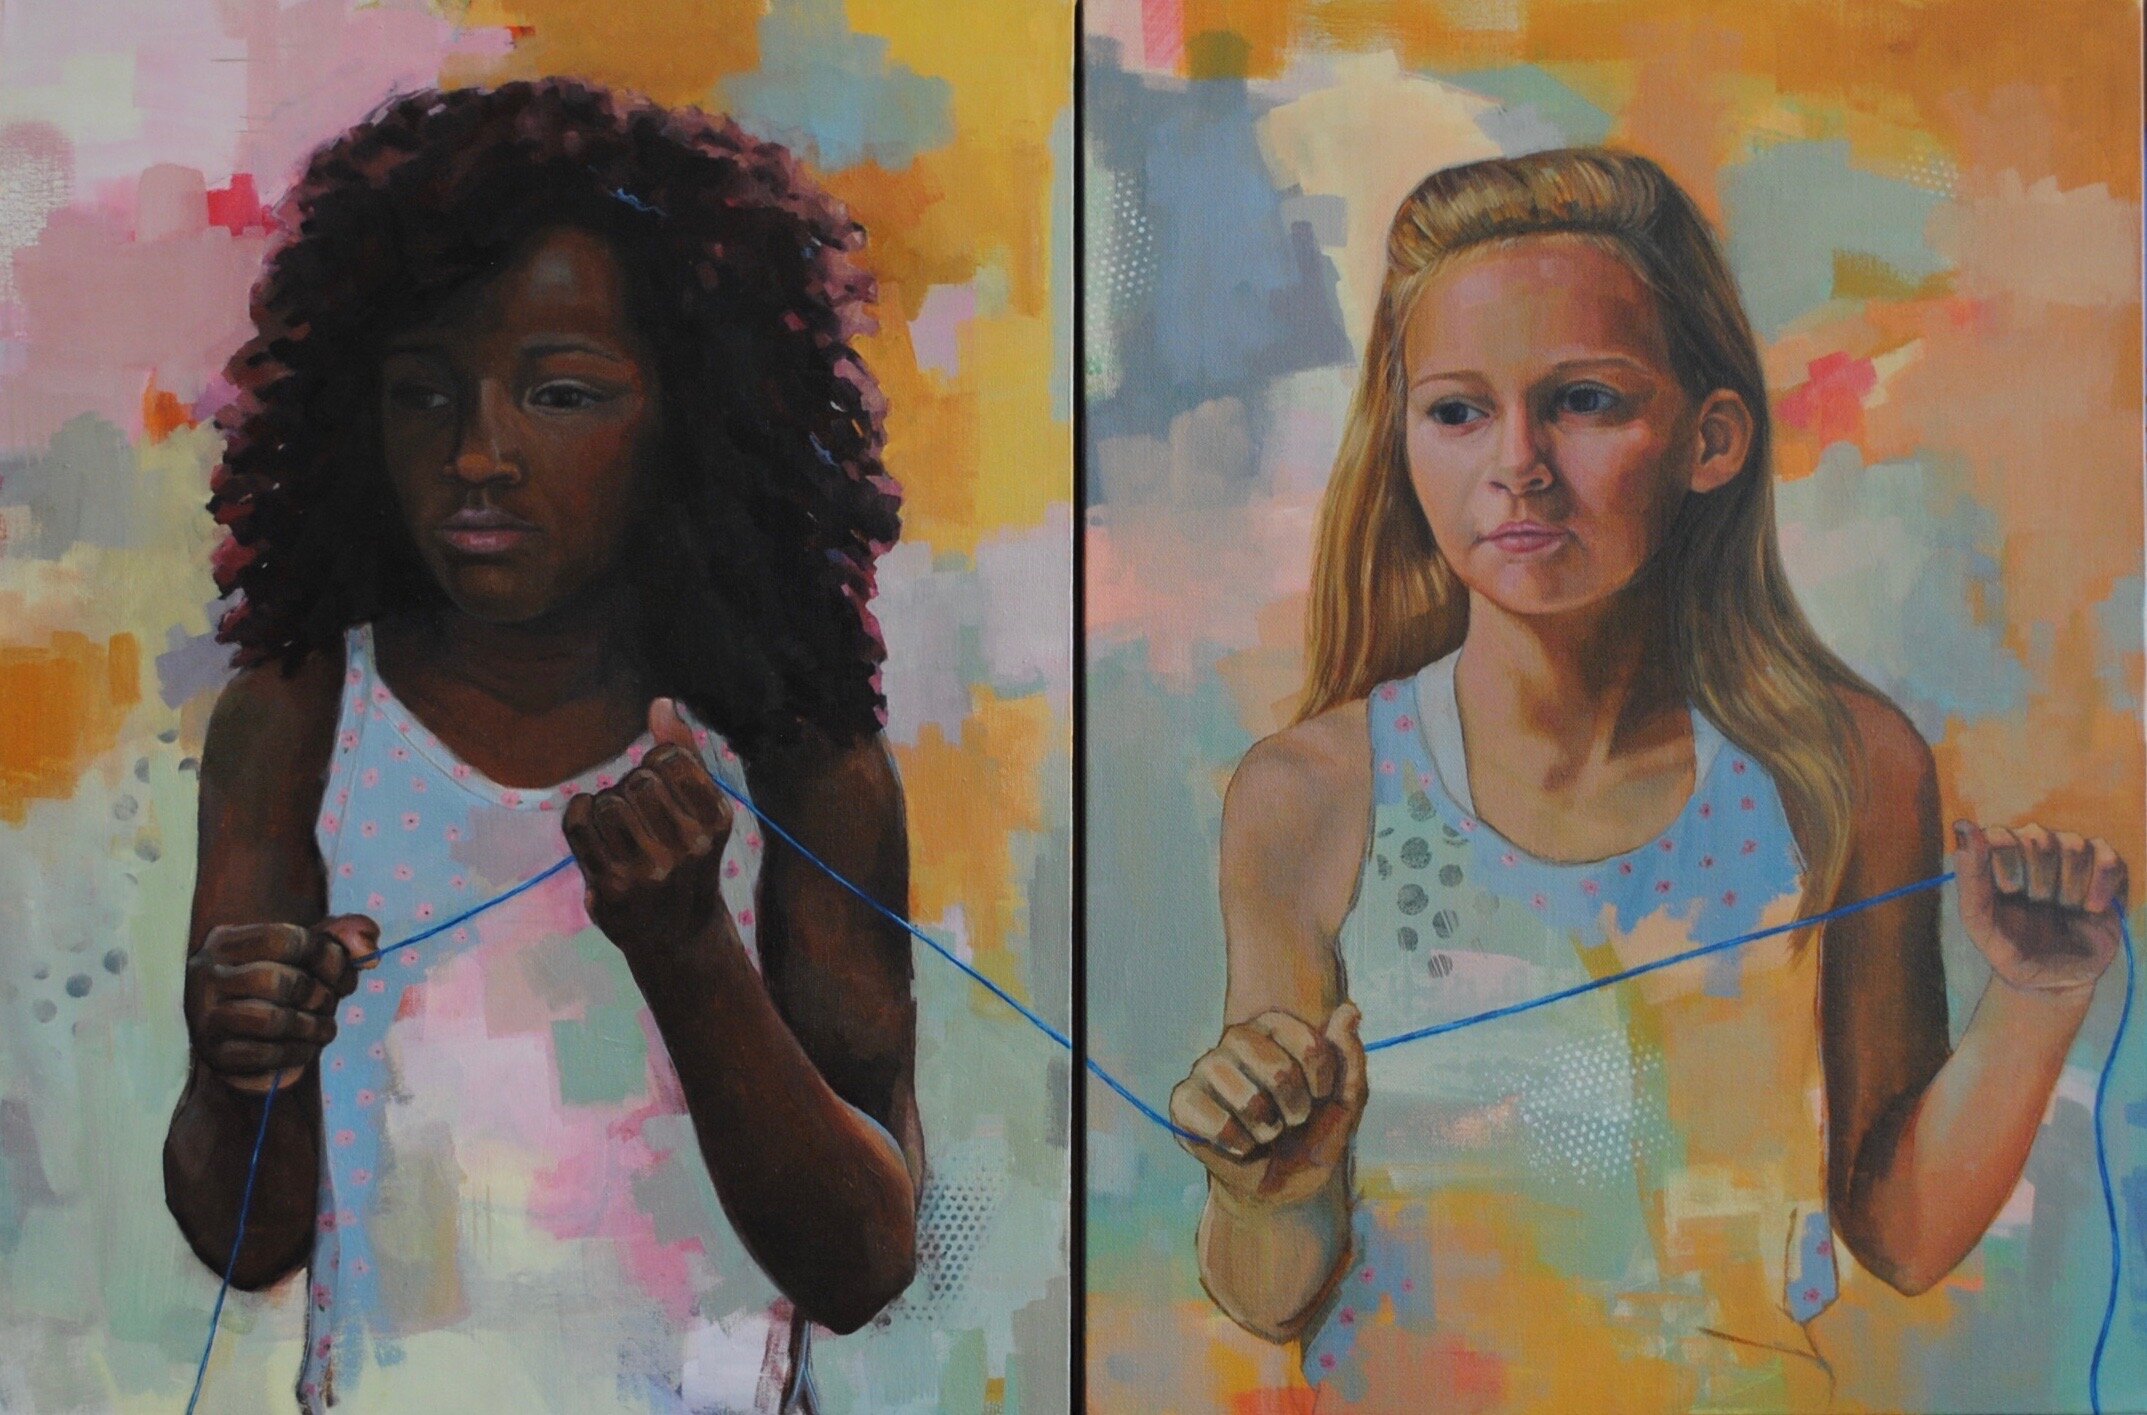    Holding On   (diptych), 24” x 36” combined, oil on canvas 